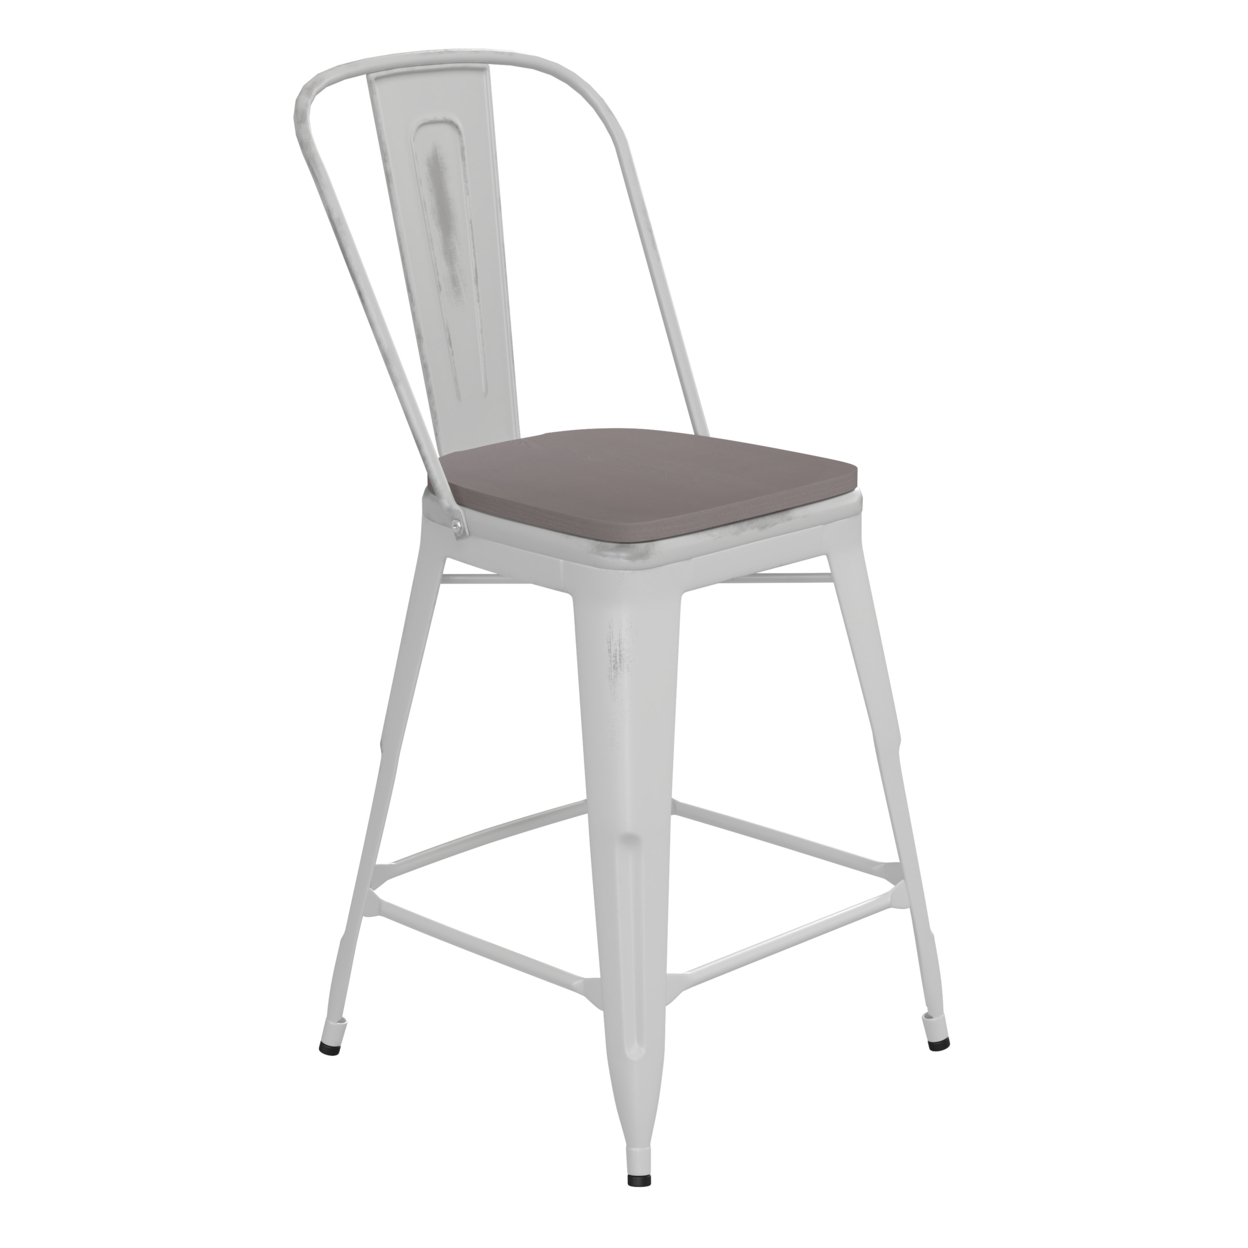 24 Inch Metal Counter Stool, Curved Open Back, Sleek Wood Seat, Light Gray